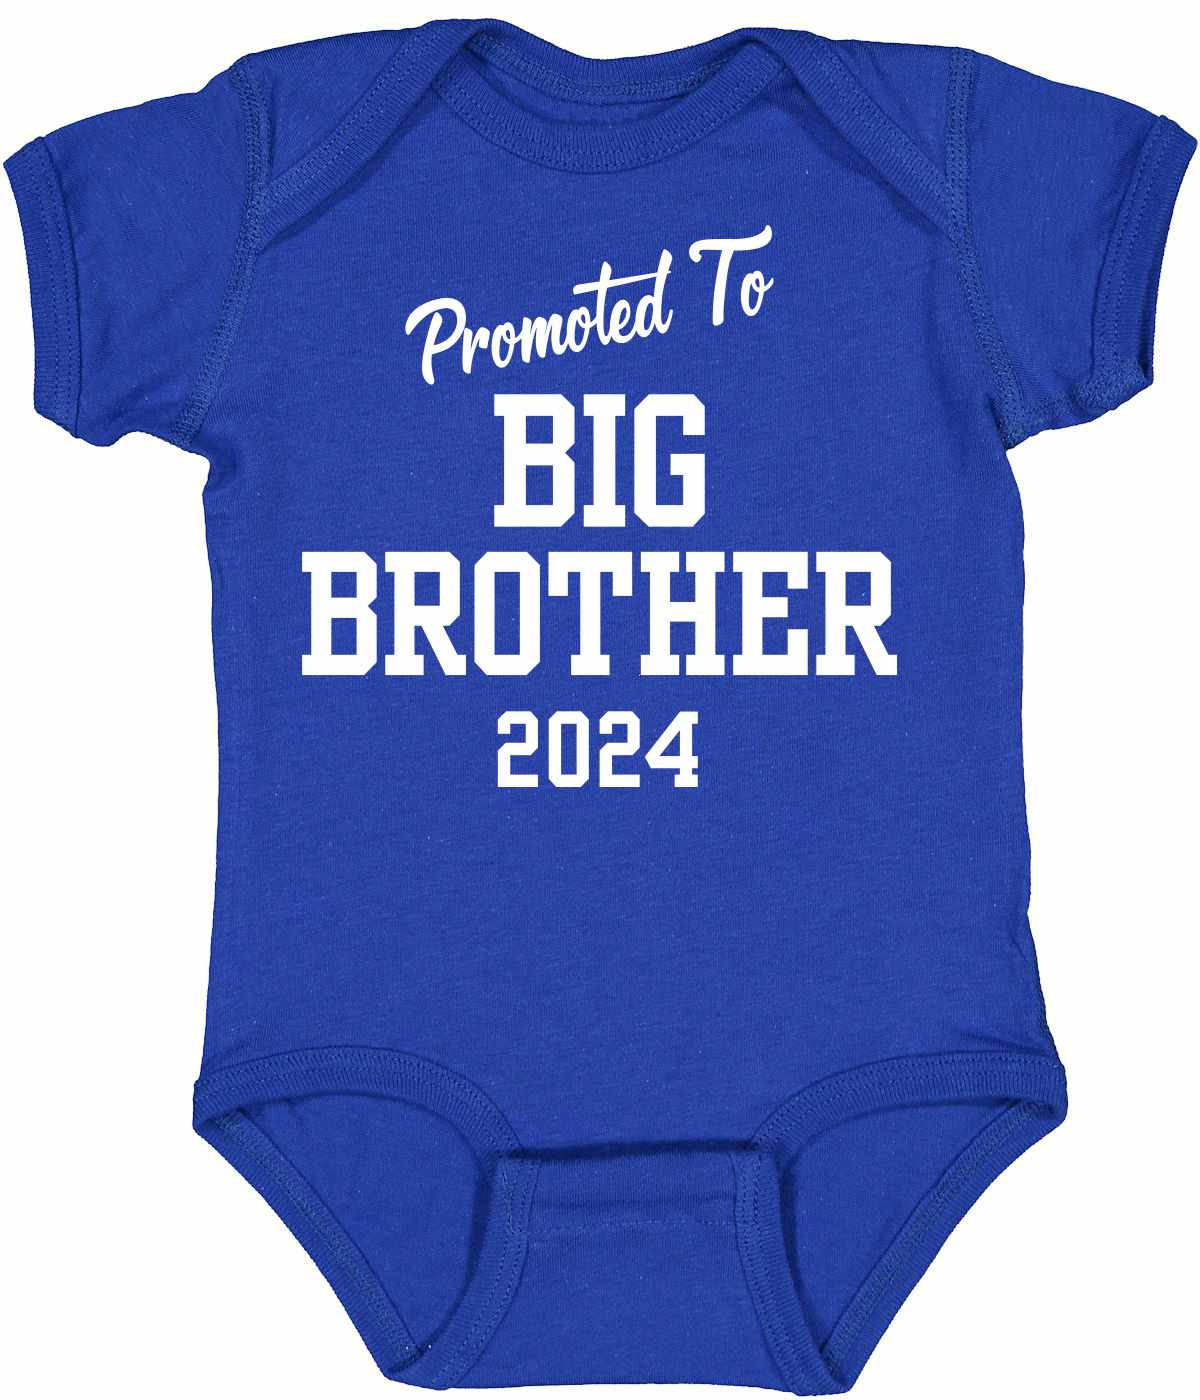 Promoted to Big Brother 2024 on Infant BodySuit (#1362-10)